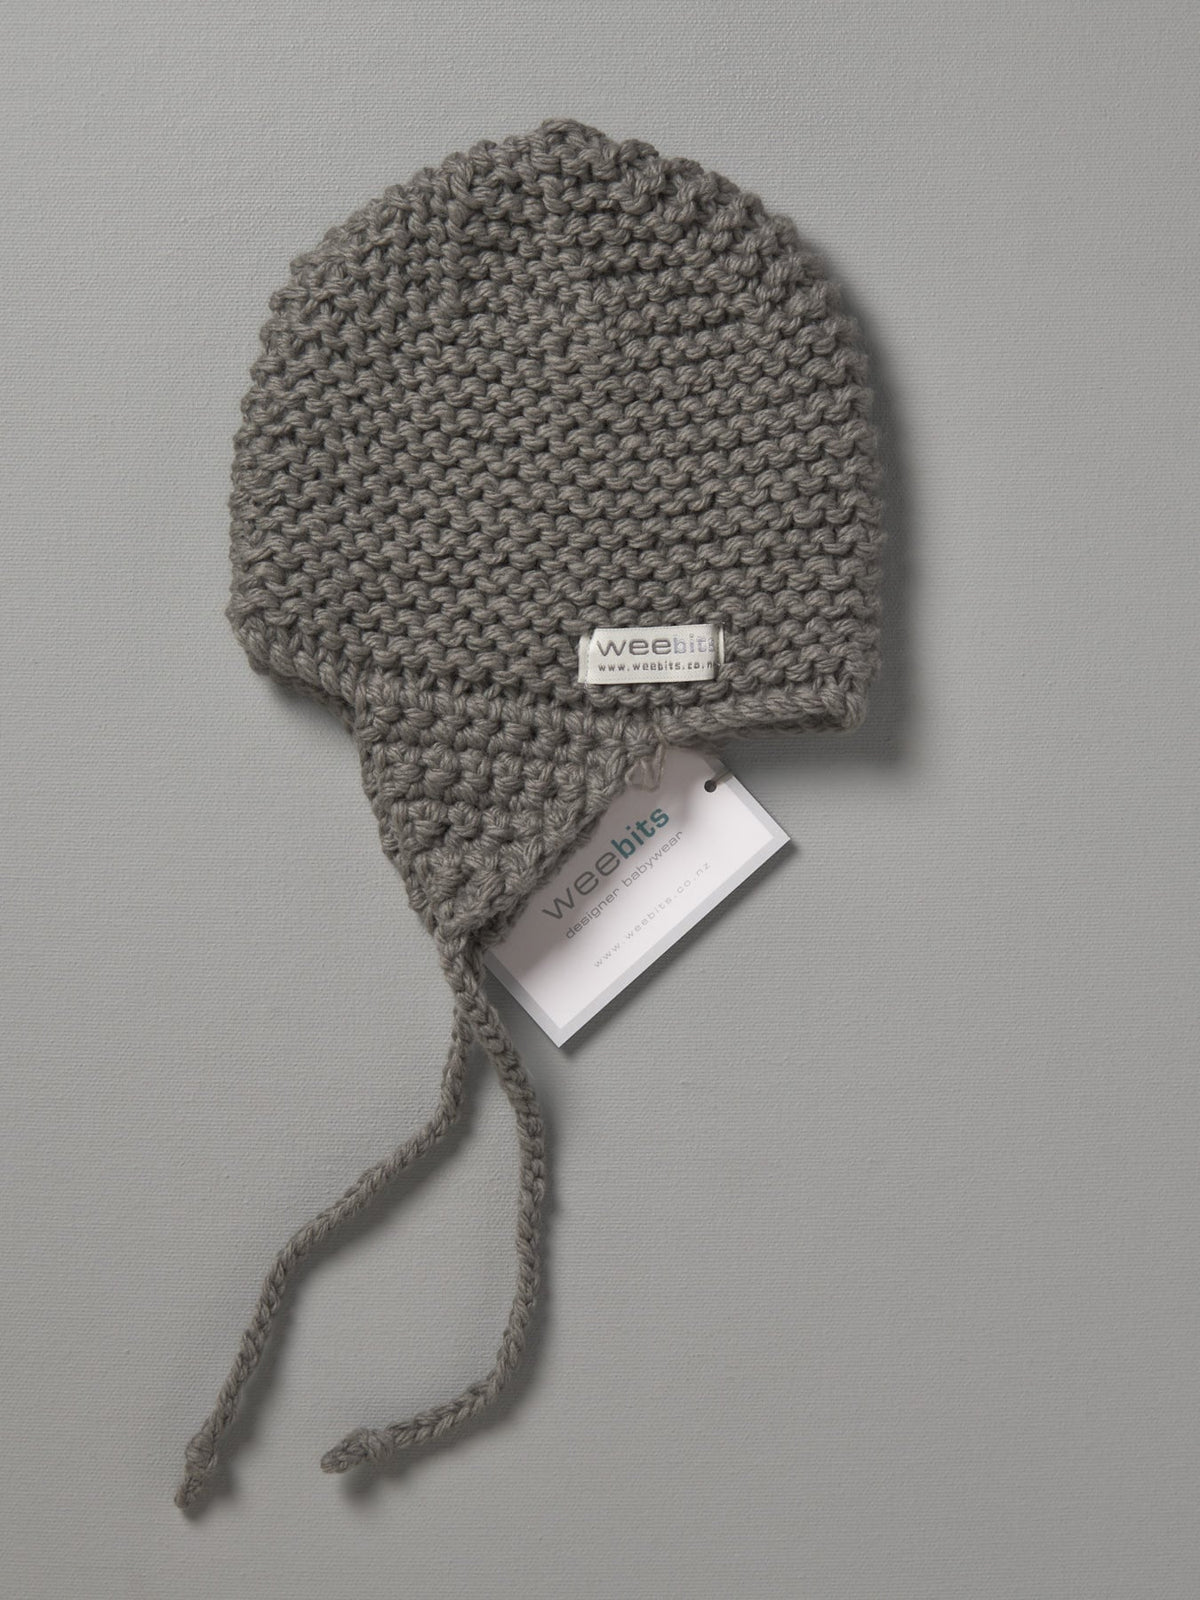 A grey Hand Knitted Chunky Knit Hat - Mushroom with a tag on it.